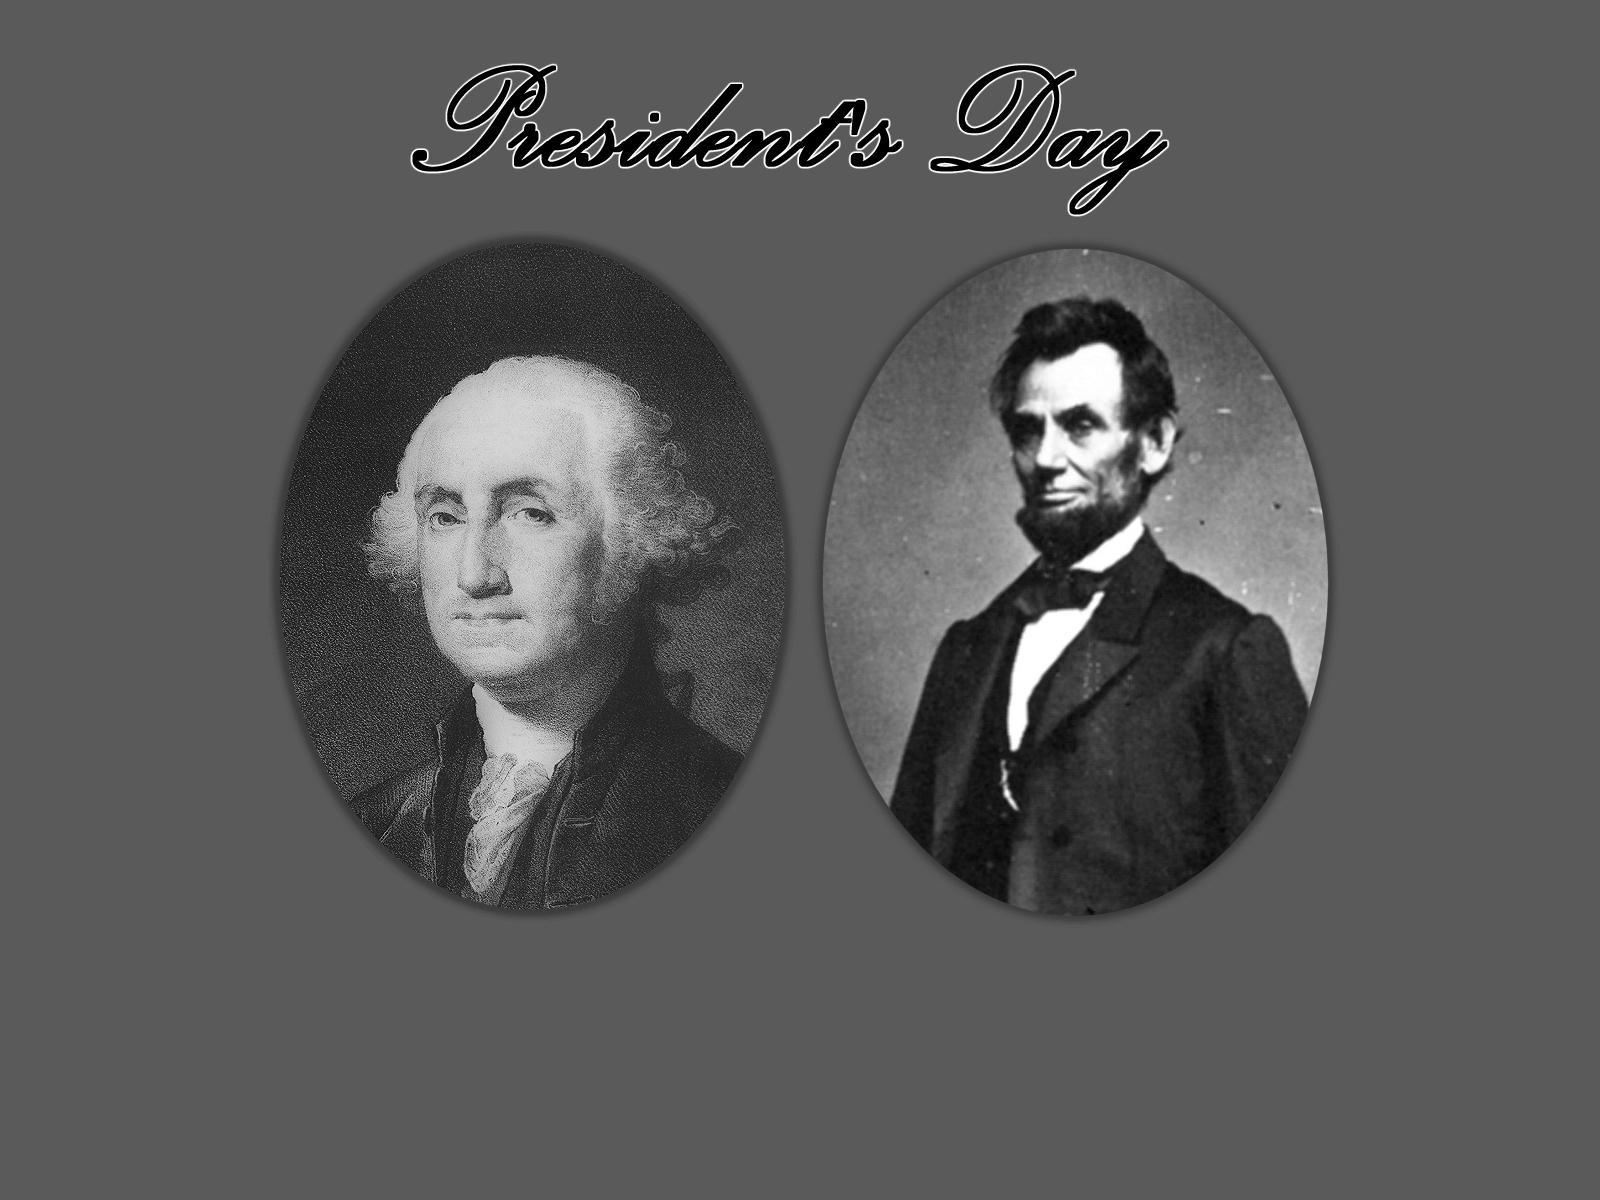 President's Day Wallpaper Background Image 1 for your Desktop With